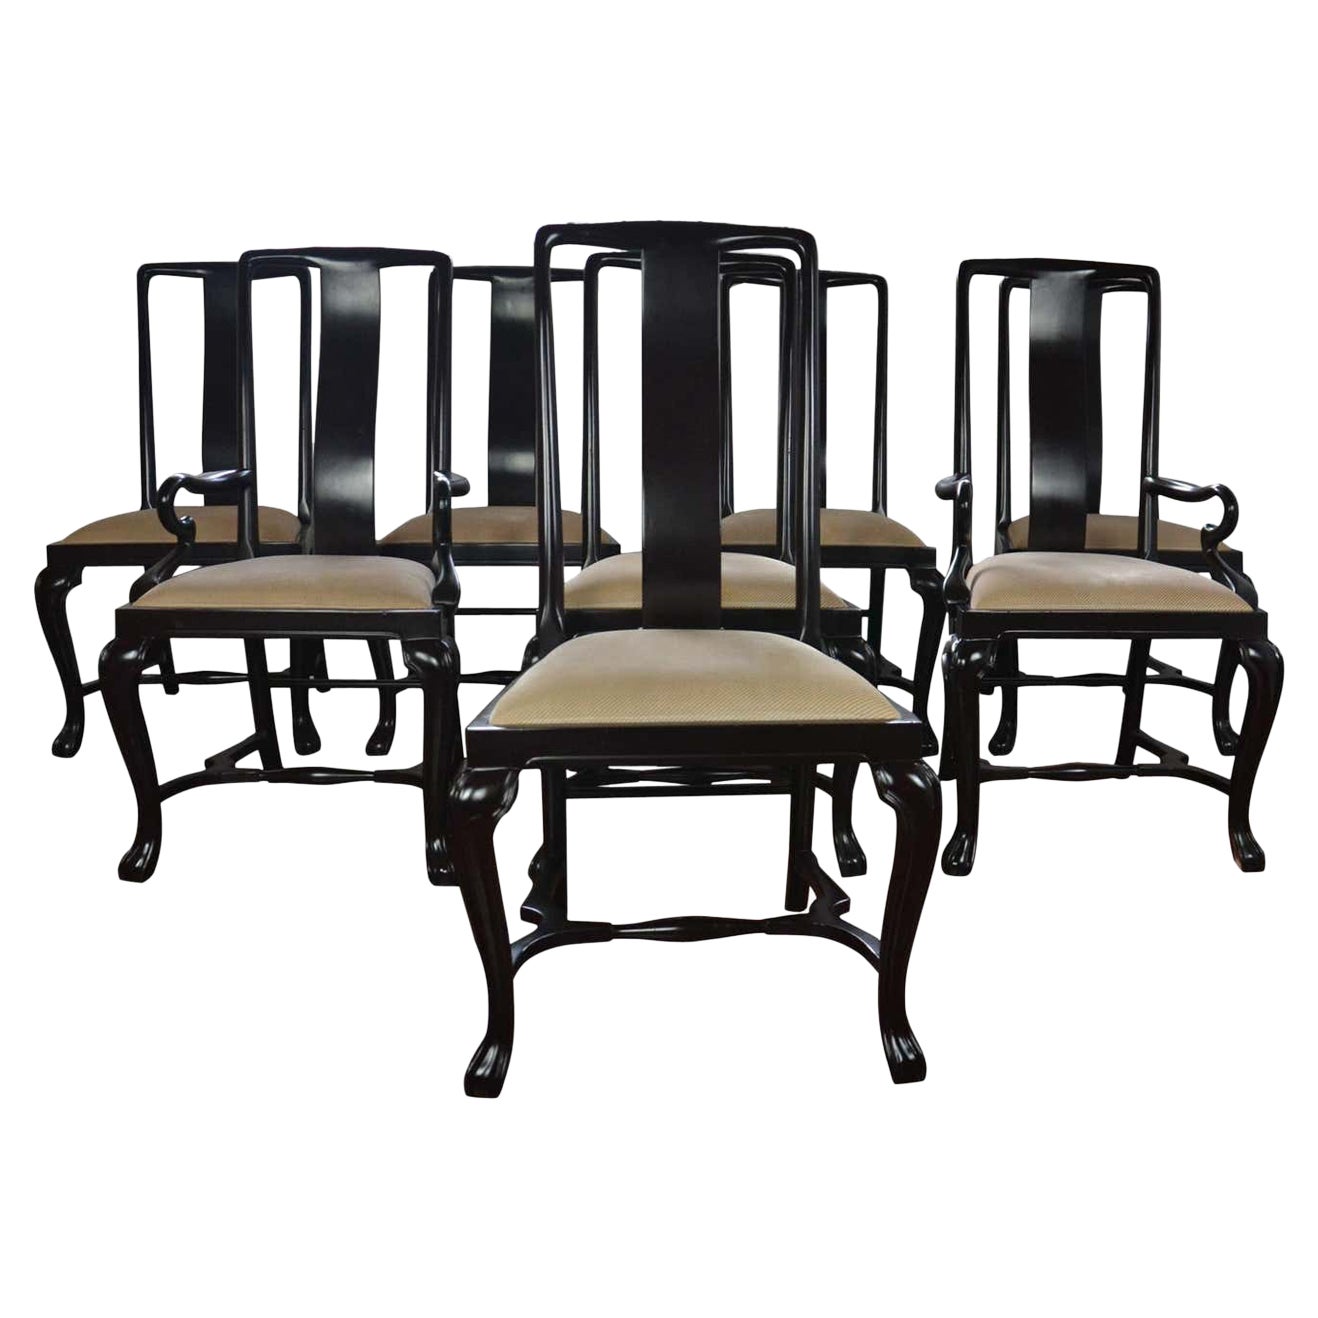 Set 8 Lacquer Finish Dining Chairs